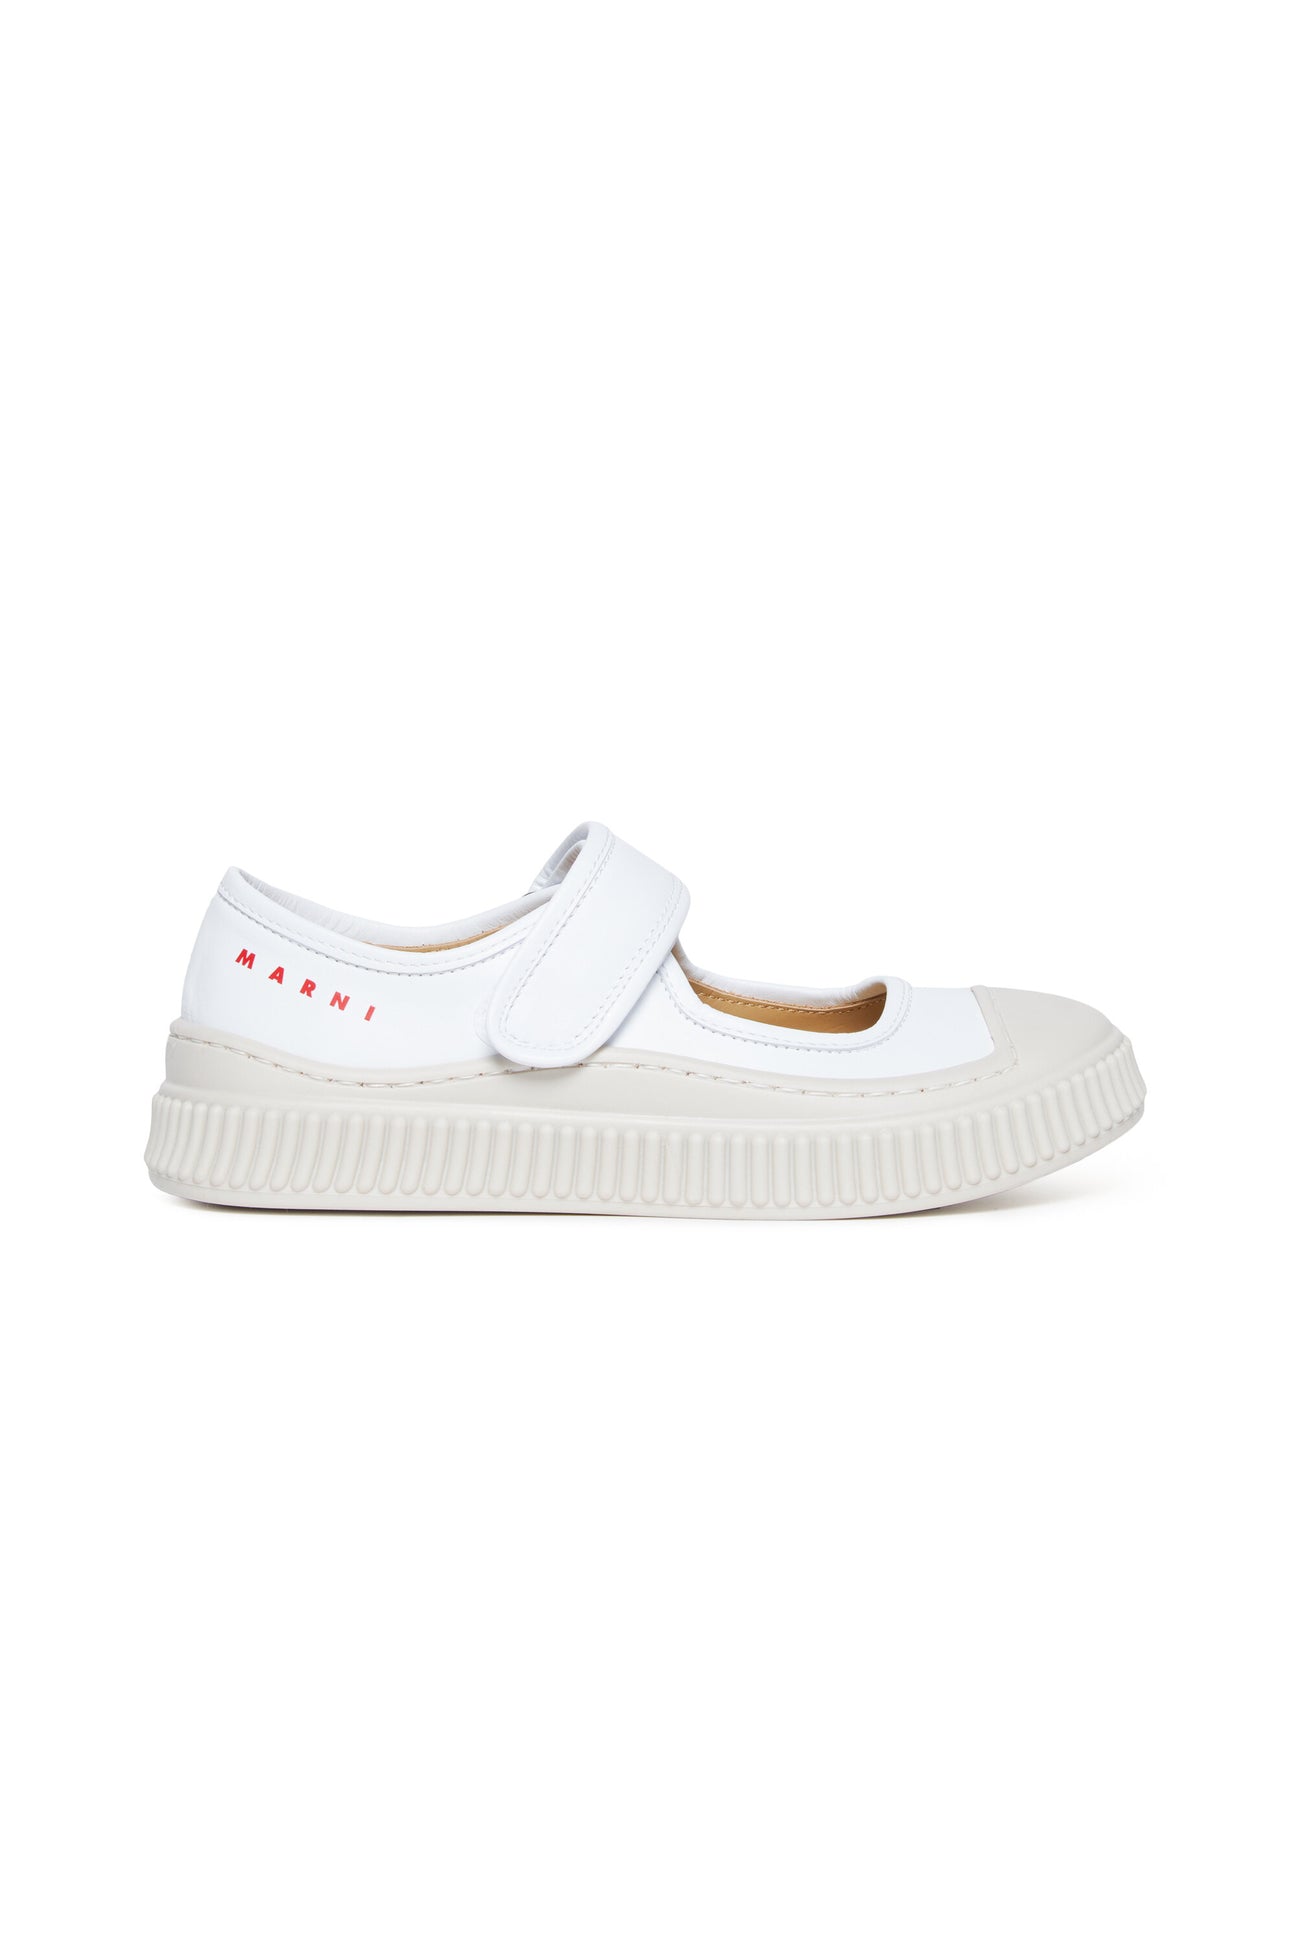 Pablo Mary Jane leather low top sneakers 